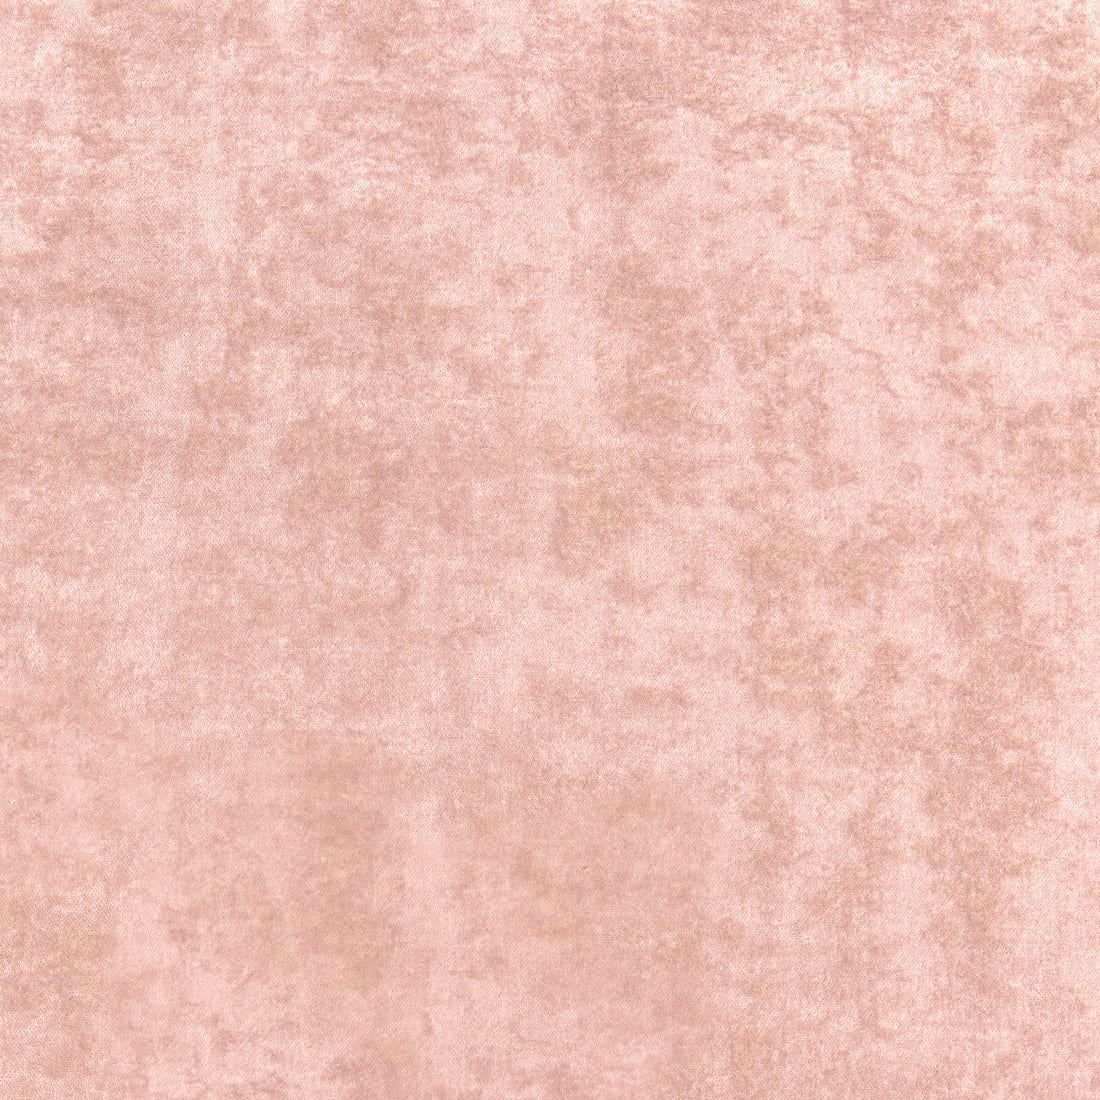 Celeste Velvet fabric in blush color - pattern number W8969 - by Thibaut in the Lyra Velvets collection